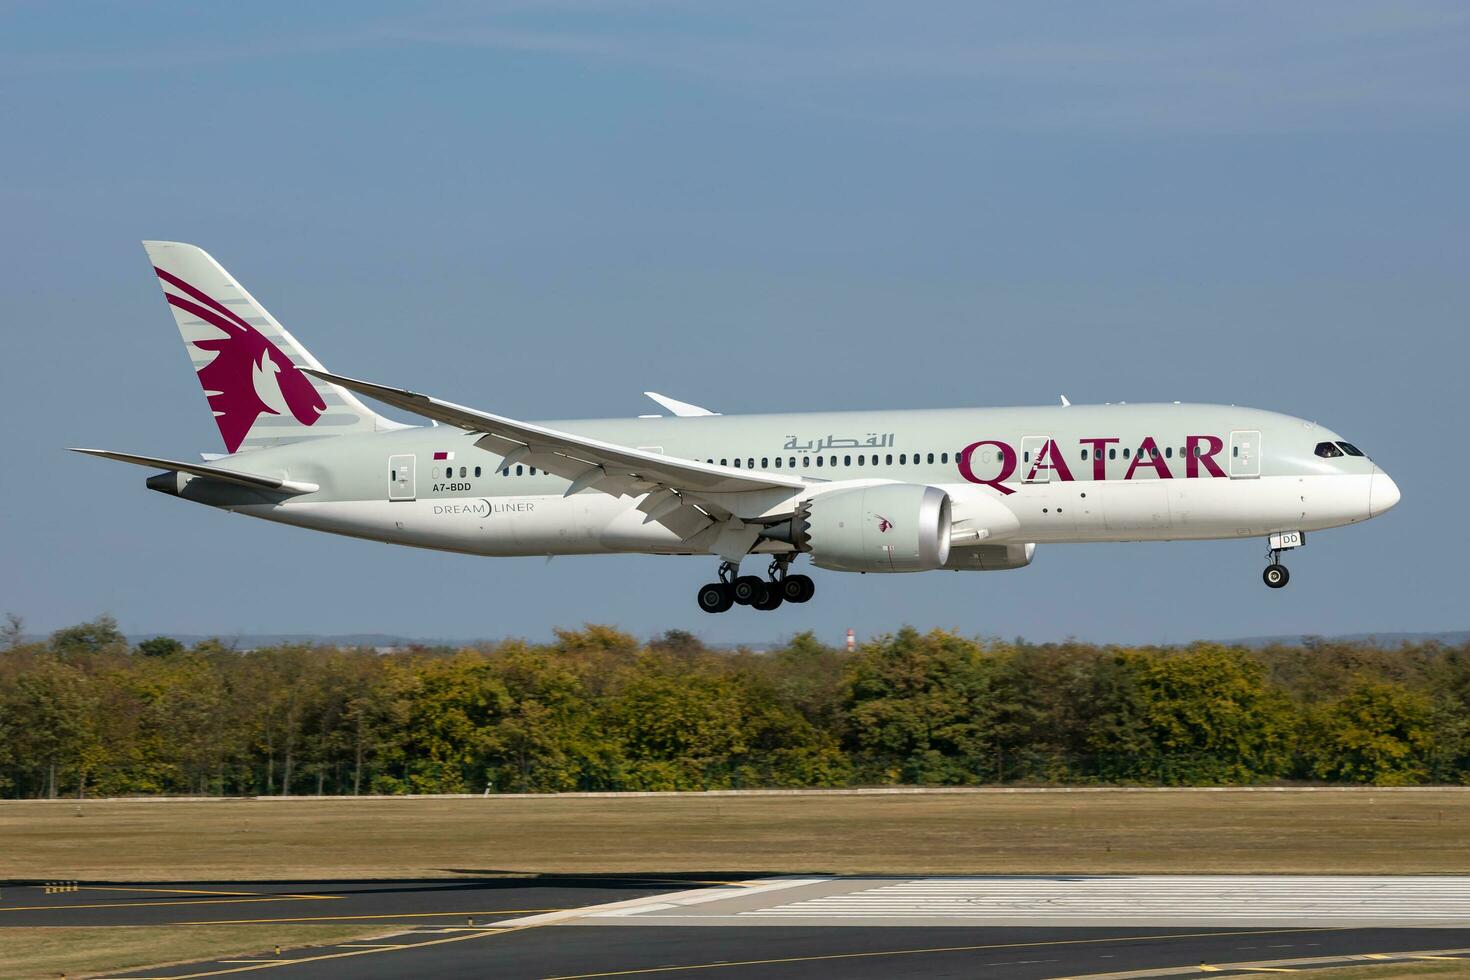 Qatar Airways Boeing 787-8 Dreamliner passenger plane at airport. Aviation and aircraft. Air transport and travel. International transportation. Fly and flying. photo